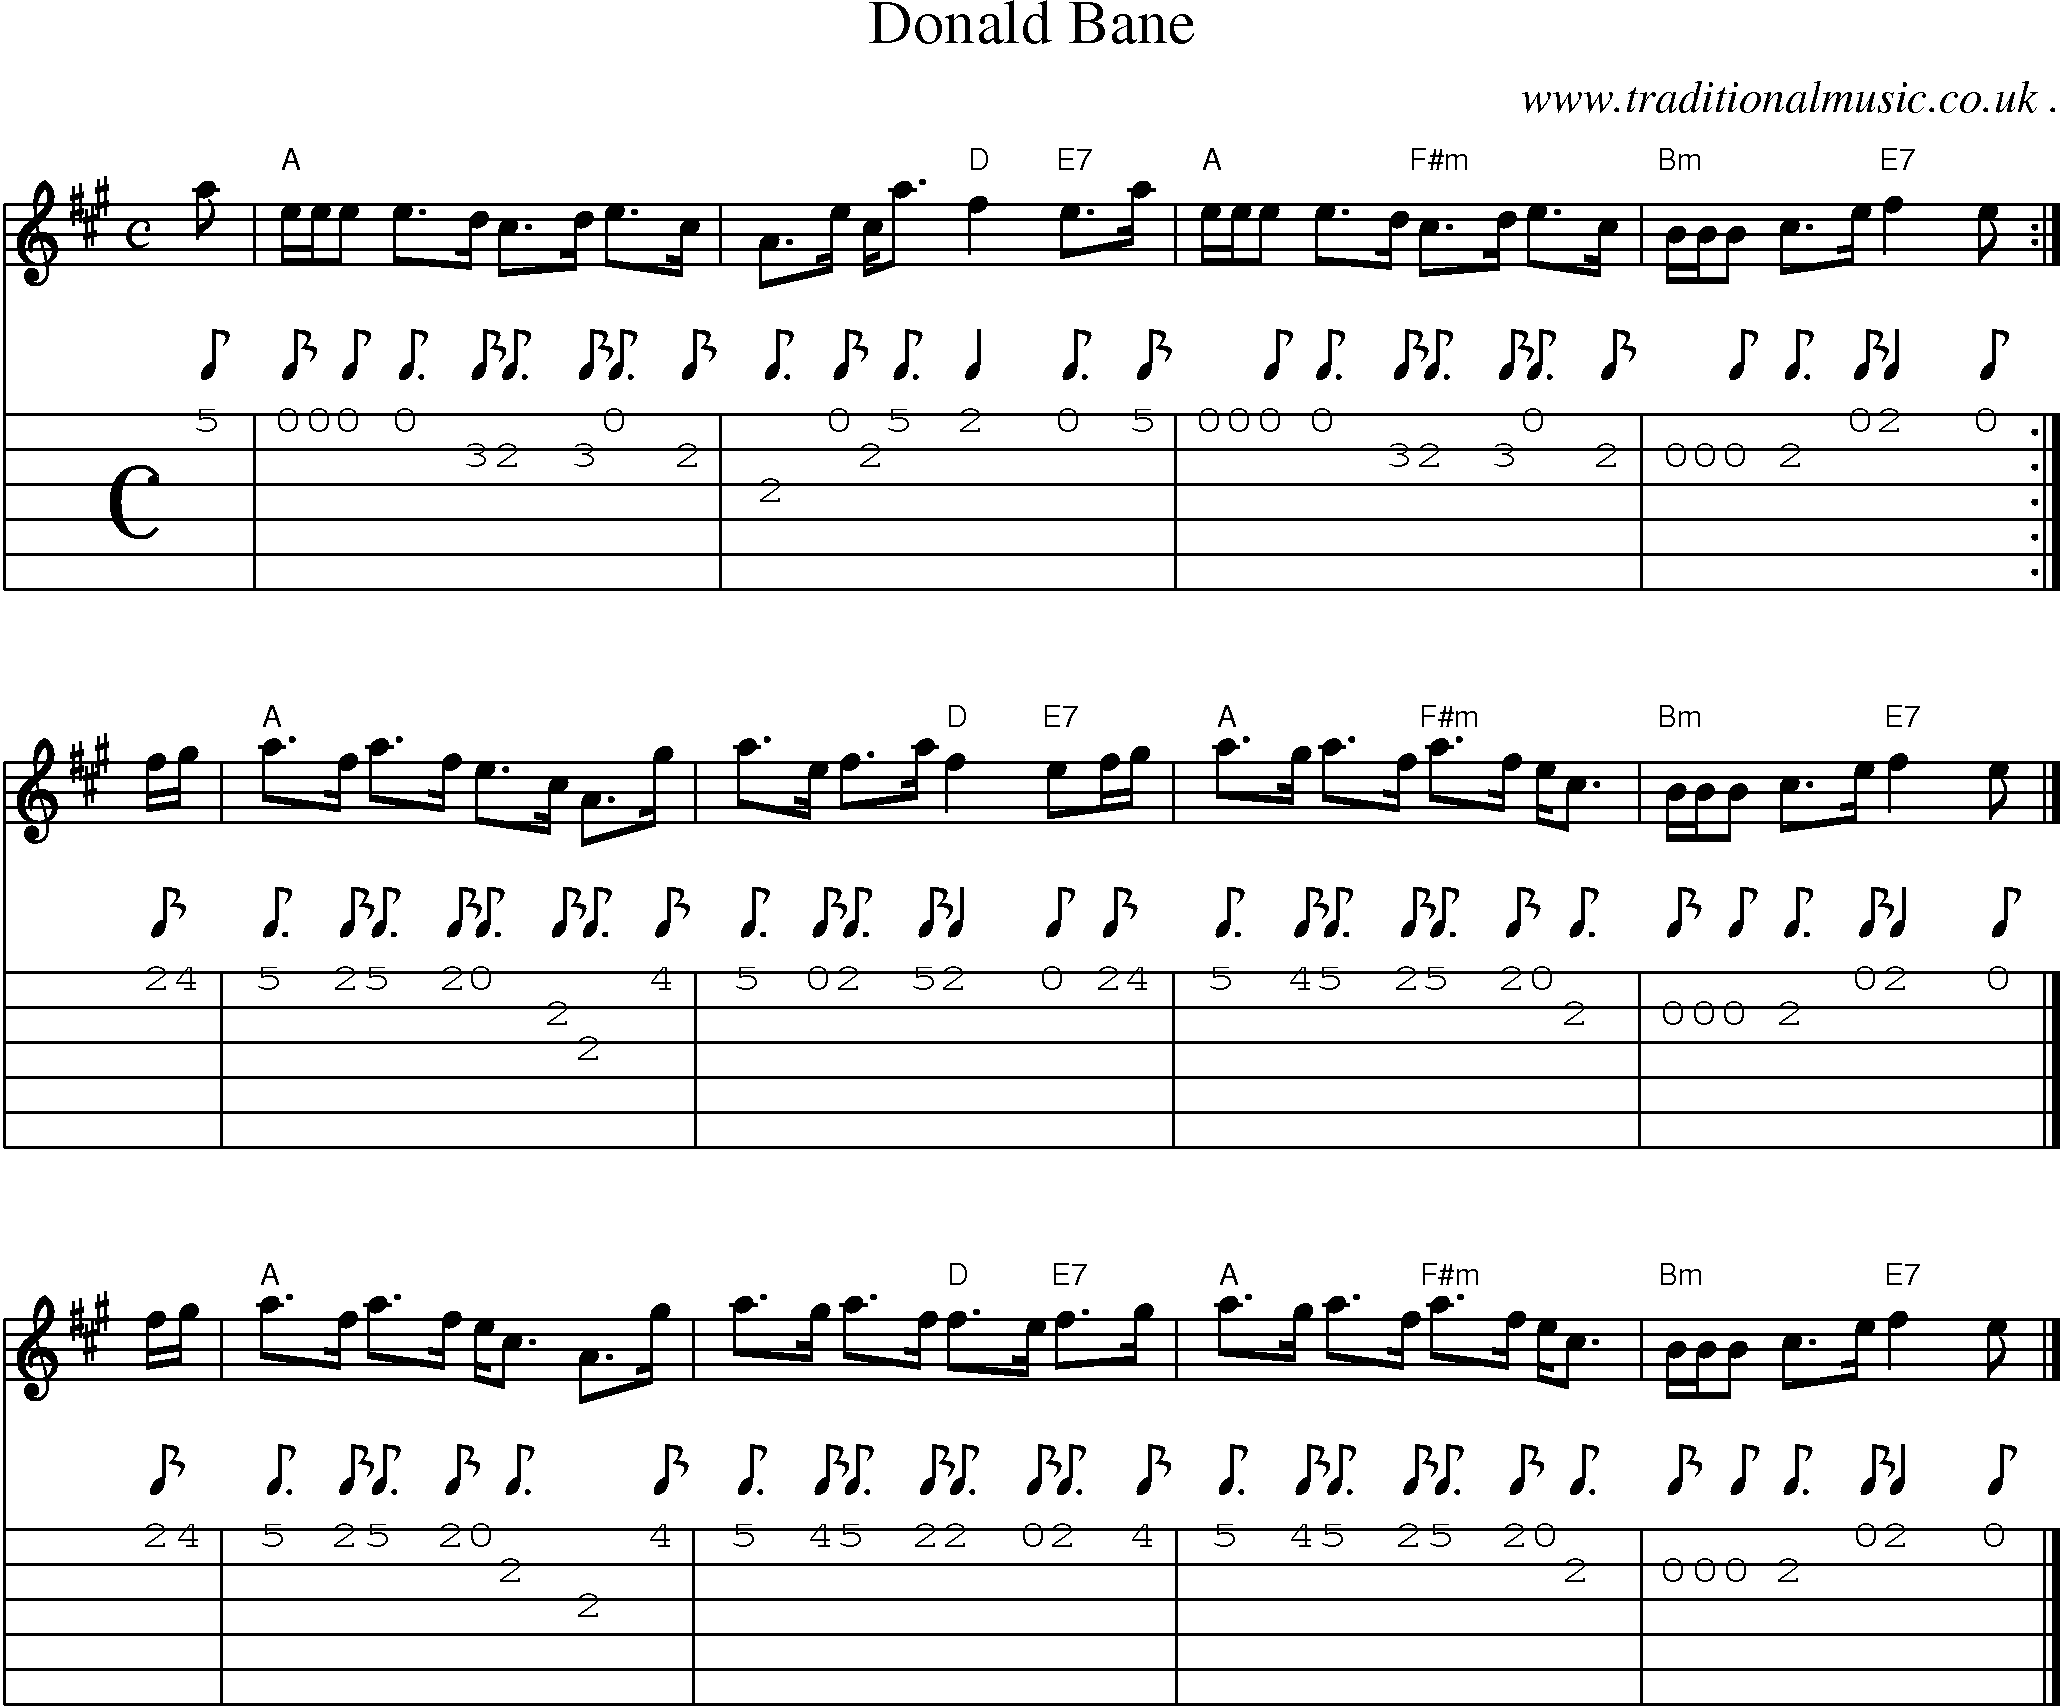 Sheet-music  score, Chords and Guitar Tabs for Donald Bane